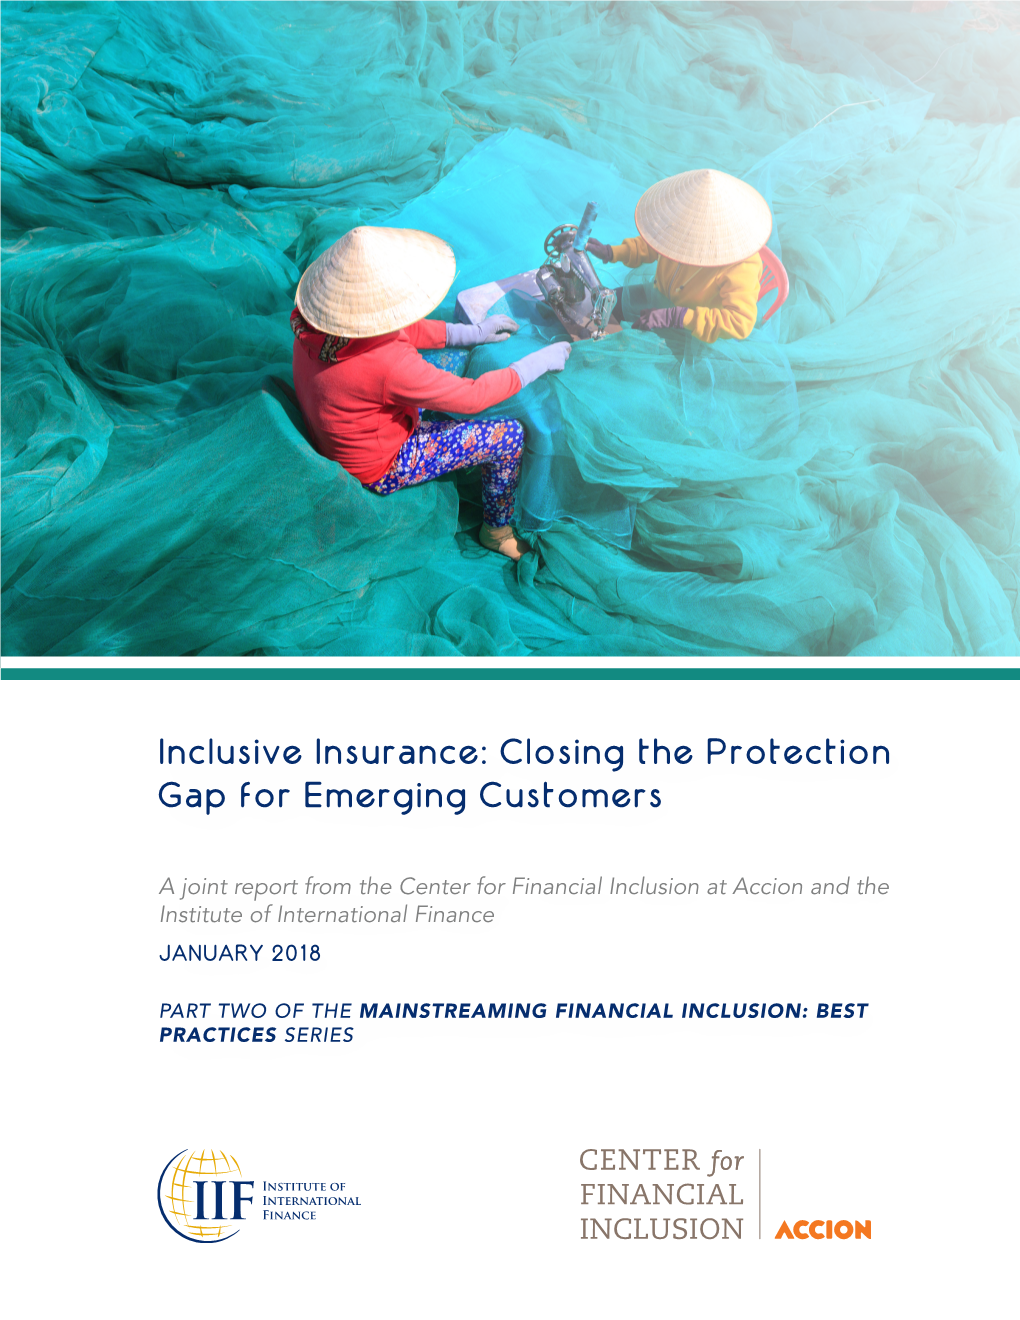 Inclusive Insurance: Closing the Protection Gap for Emerging Customers